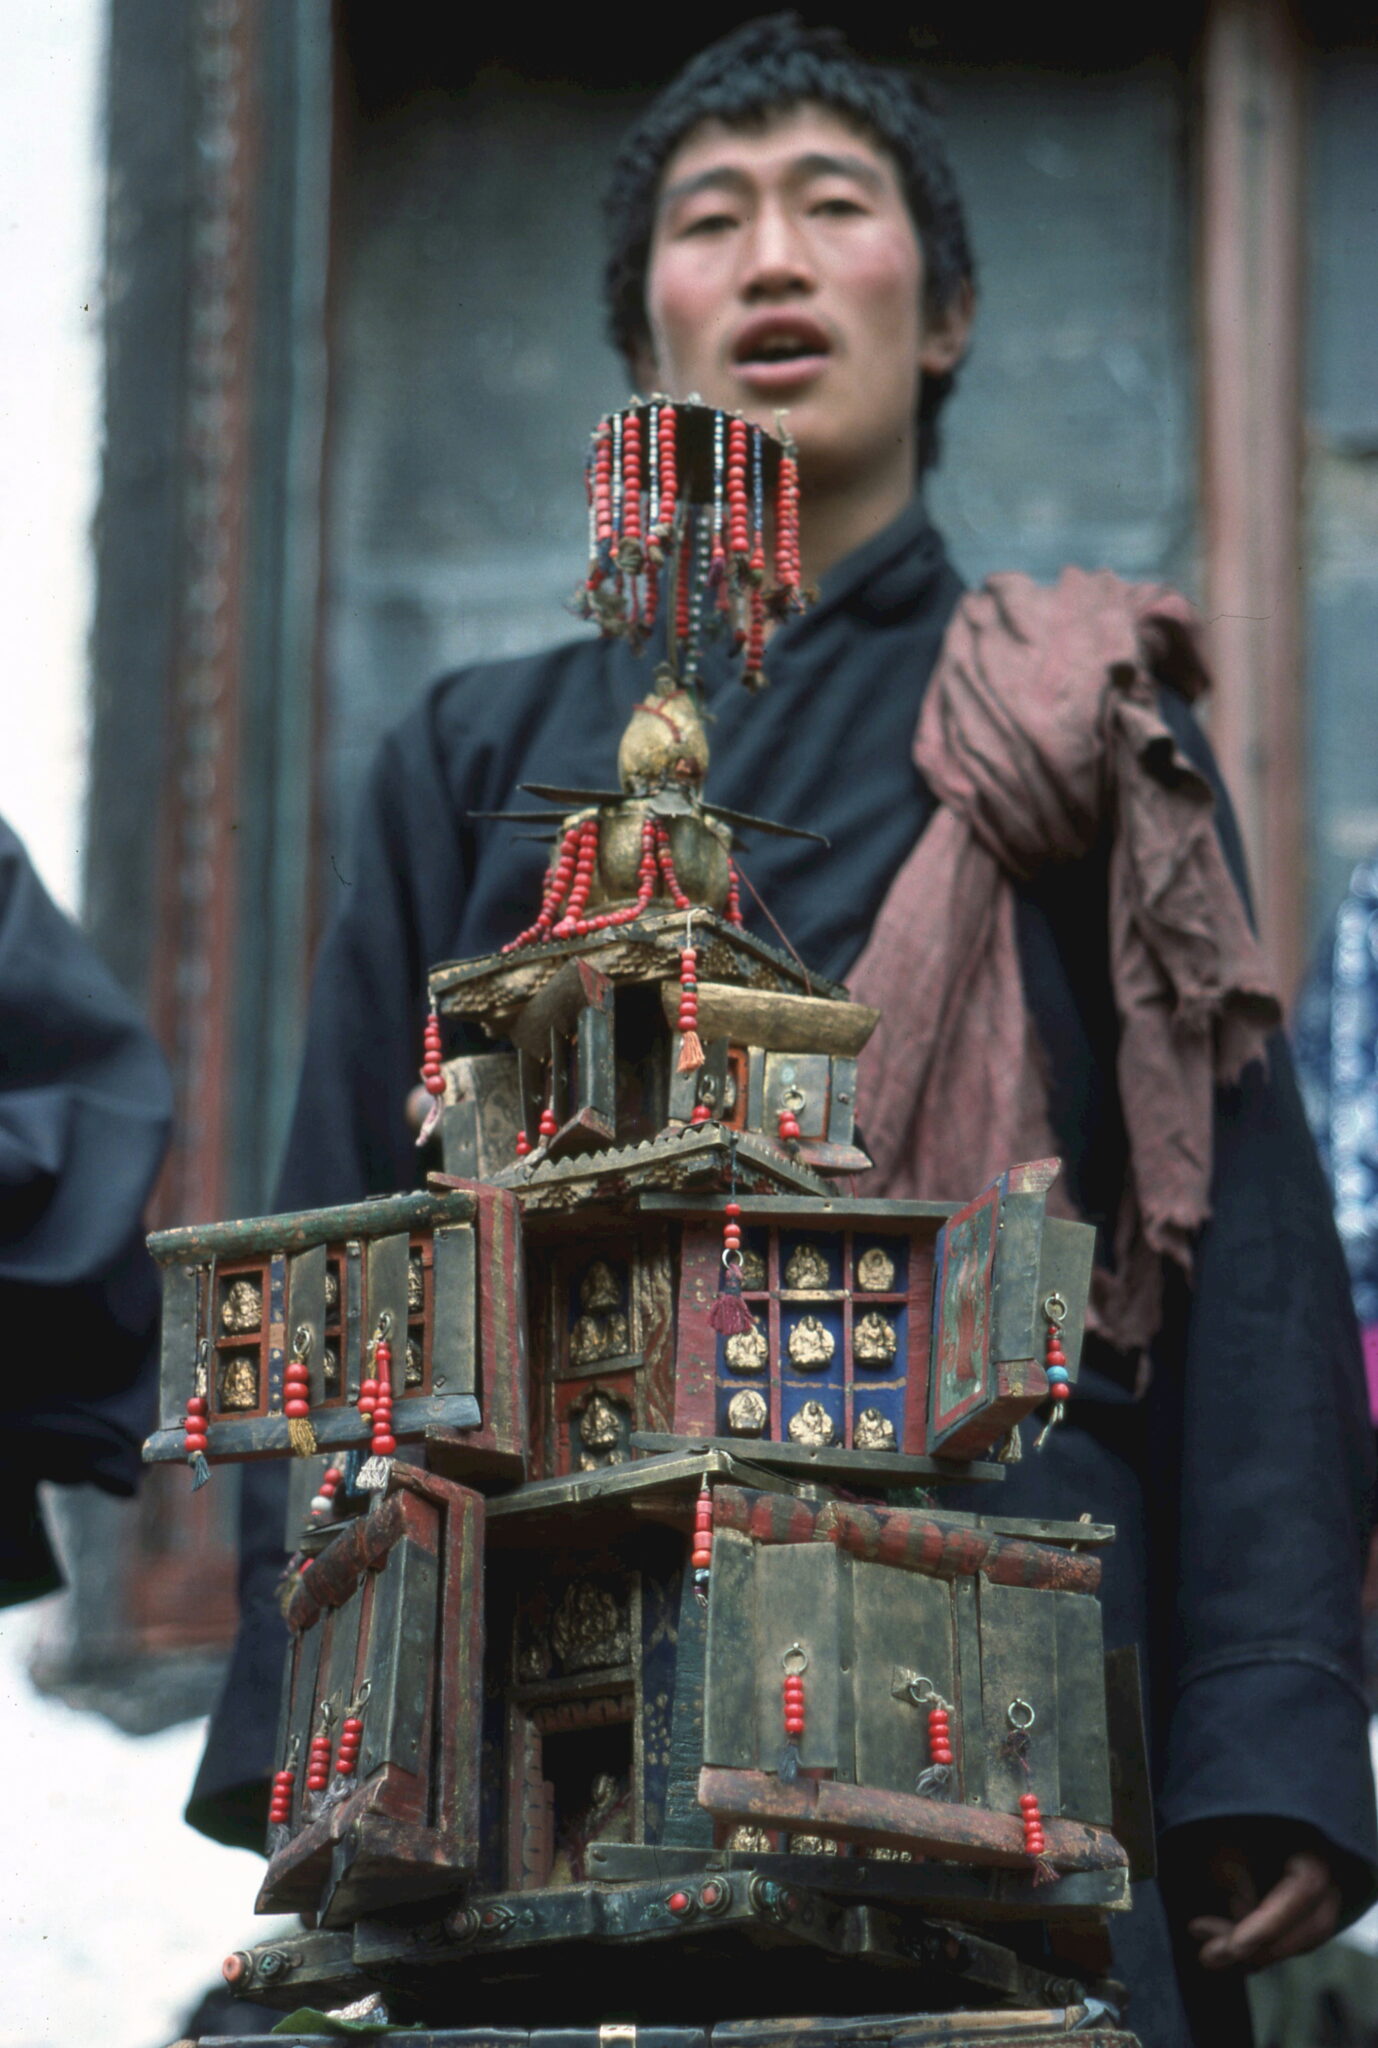 Man stands behind religious implement in the form of tiered building decorated with red beads